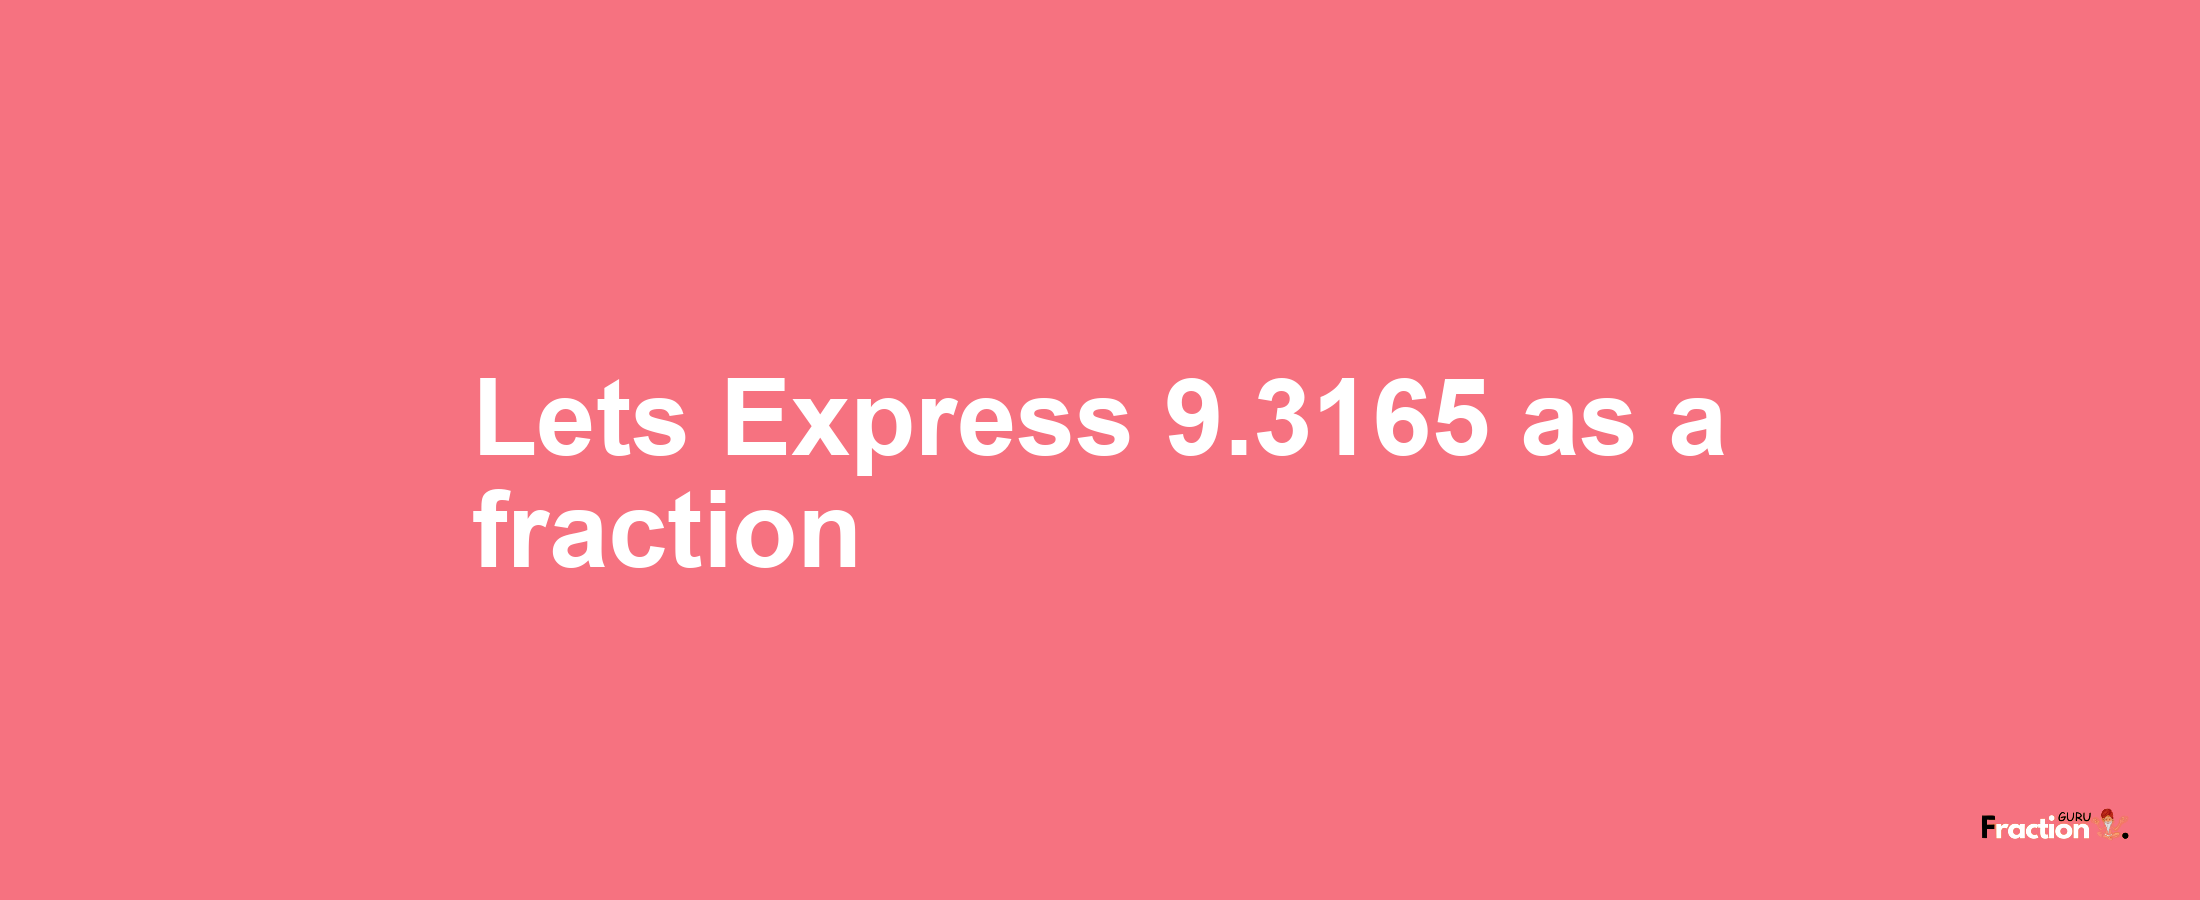 Lets Express 9.3165 as afraction